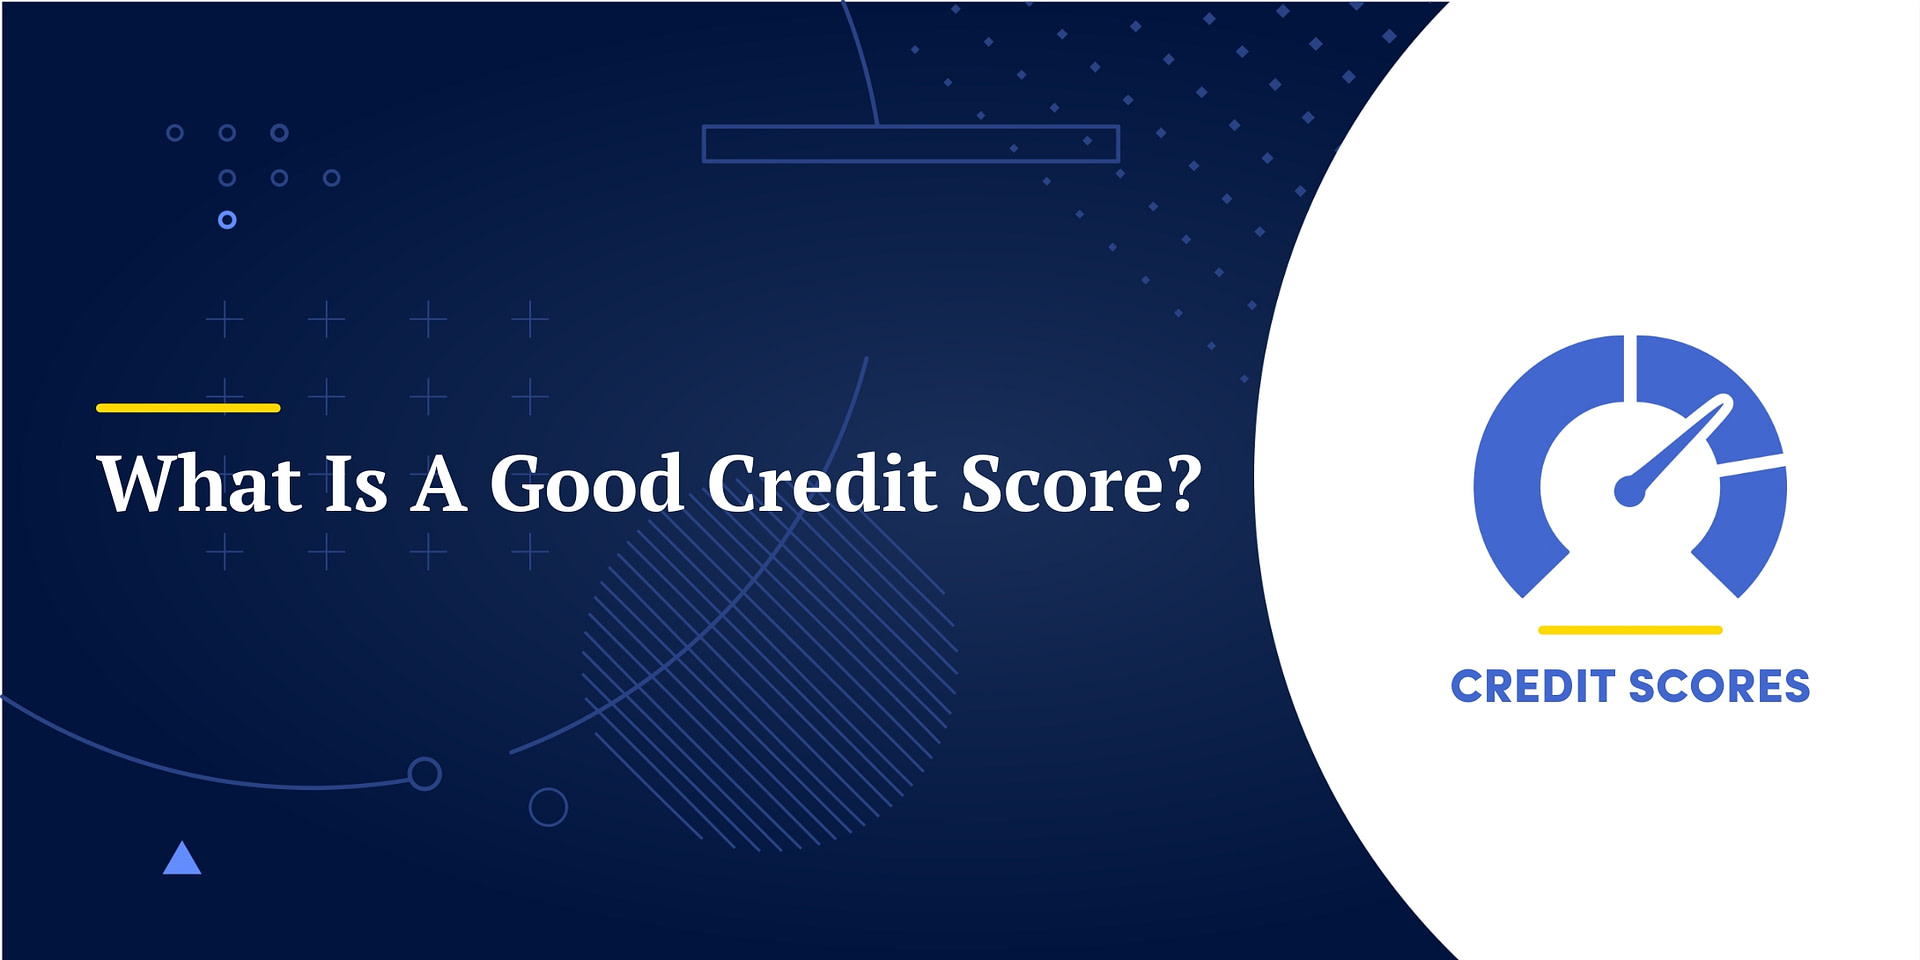 What Is A Good Credit Score and Why It Matters